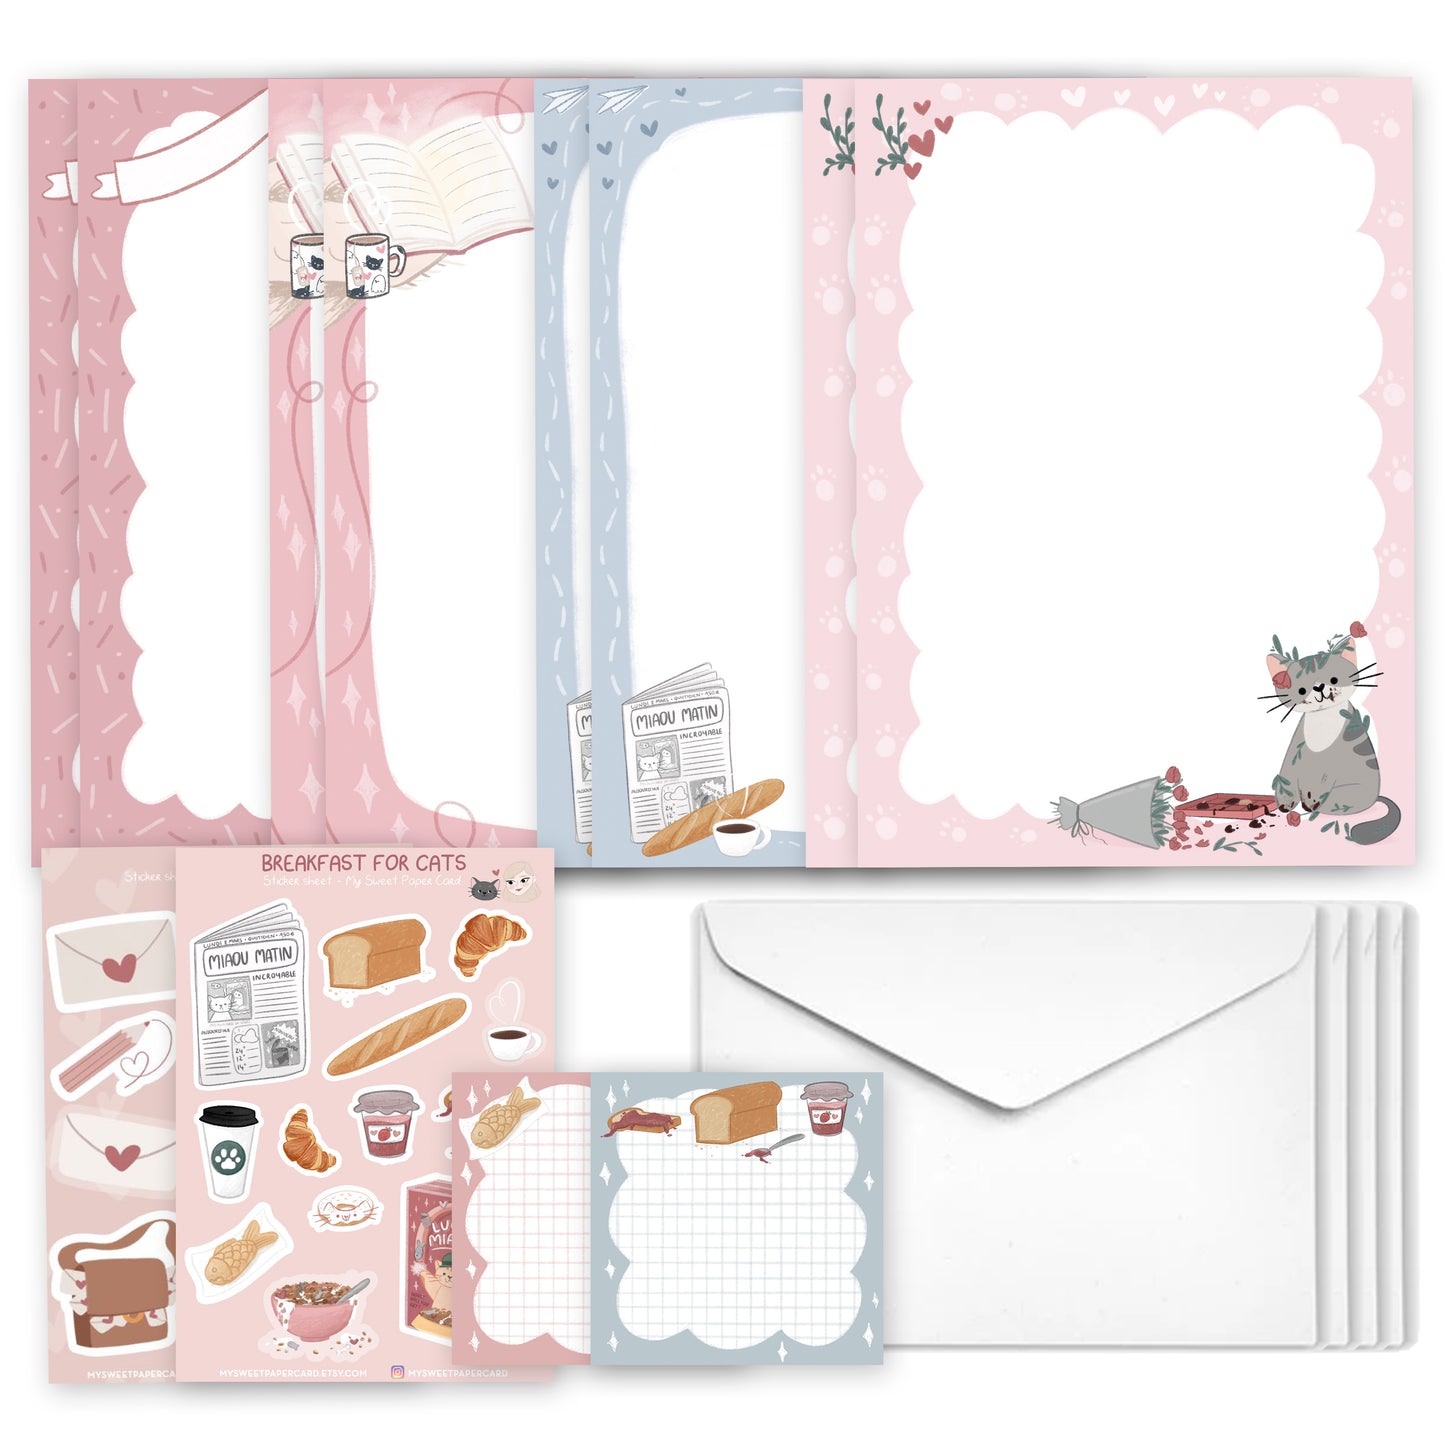 stationery kit containing writing papers, cat stickers, notes and envelopes